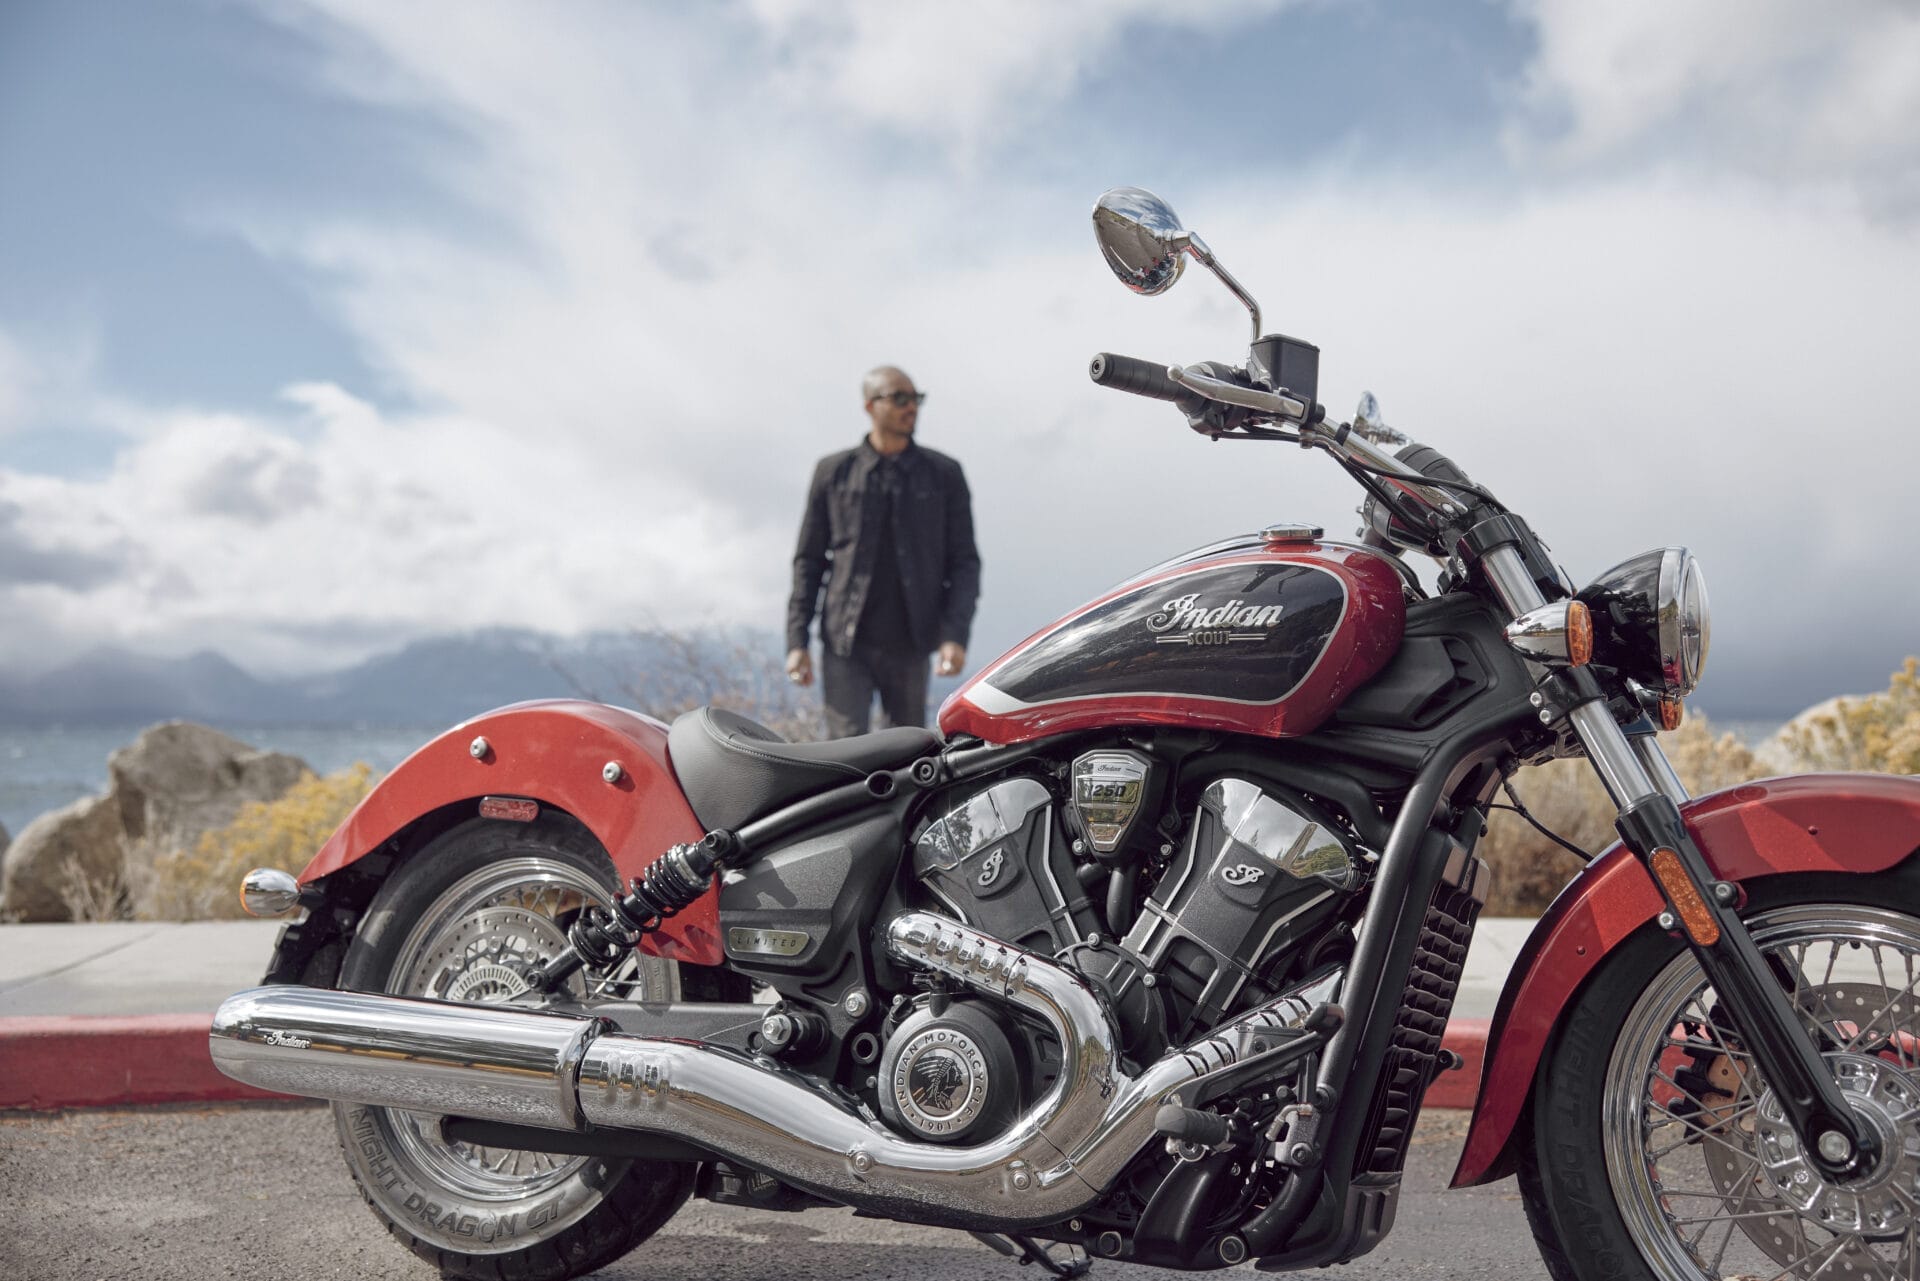 More displacement, more power: the Indian Scout enters the next round